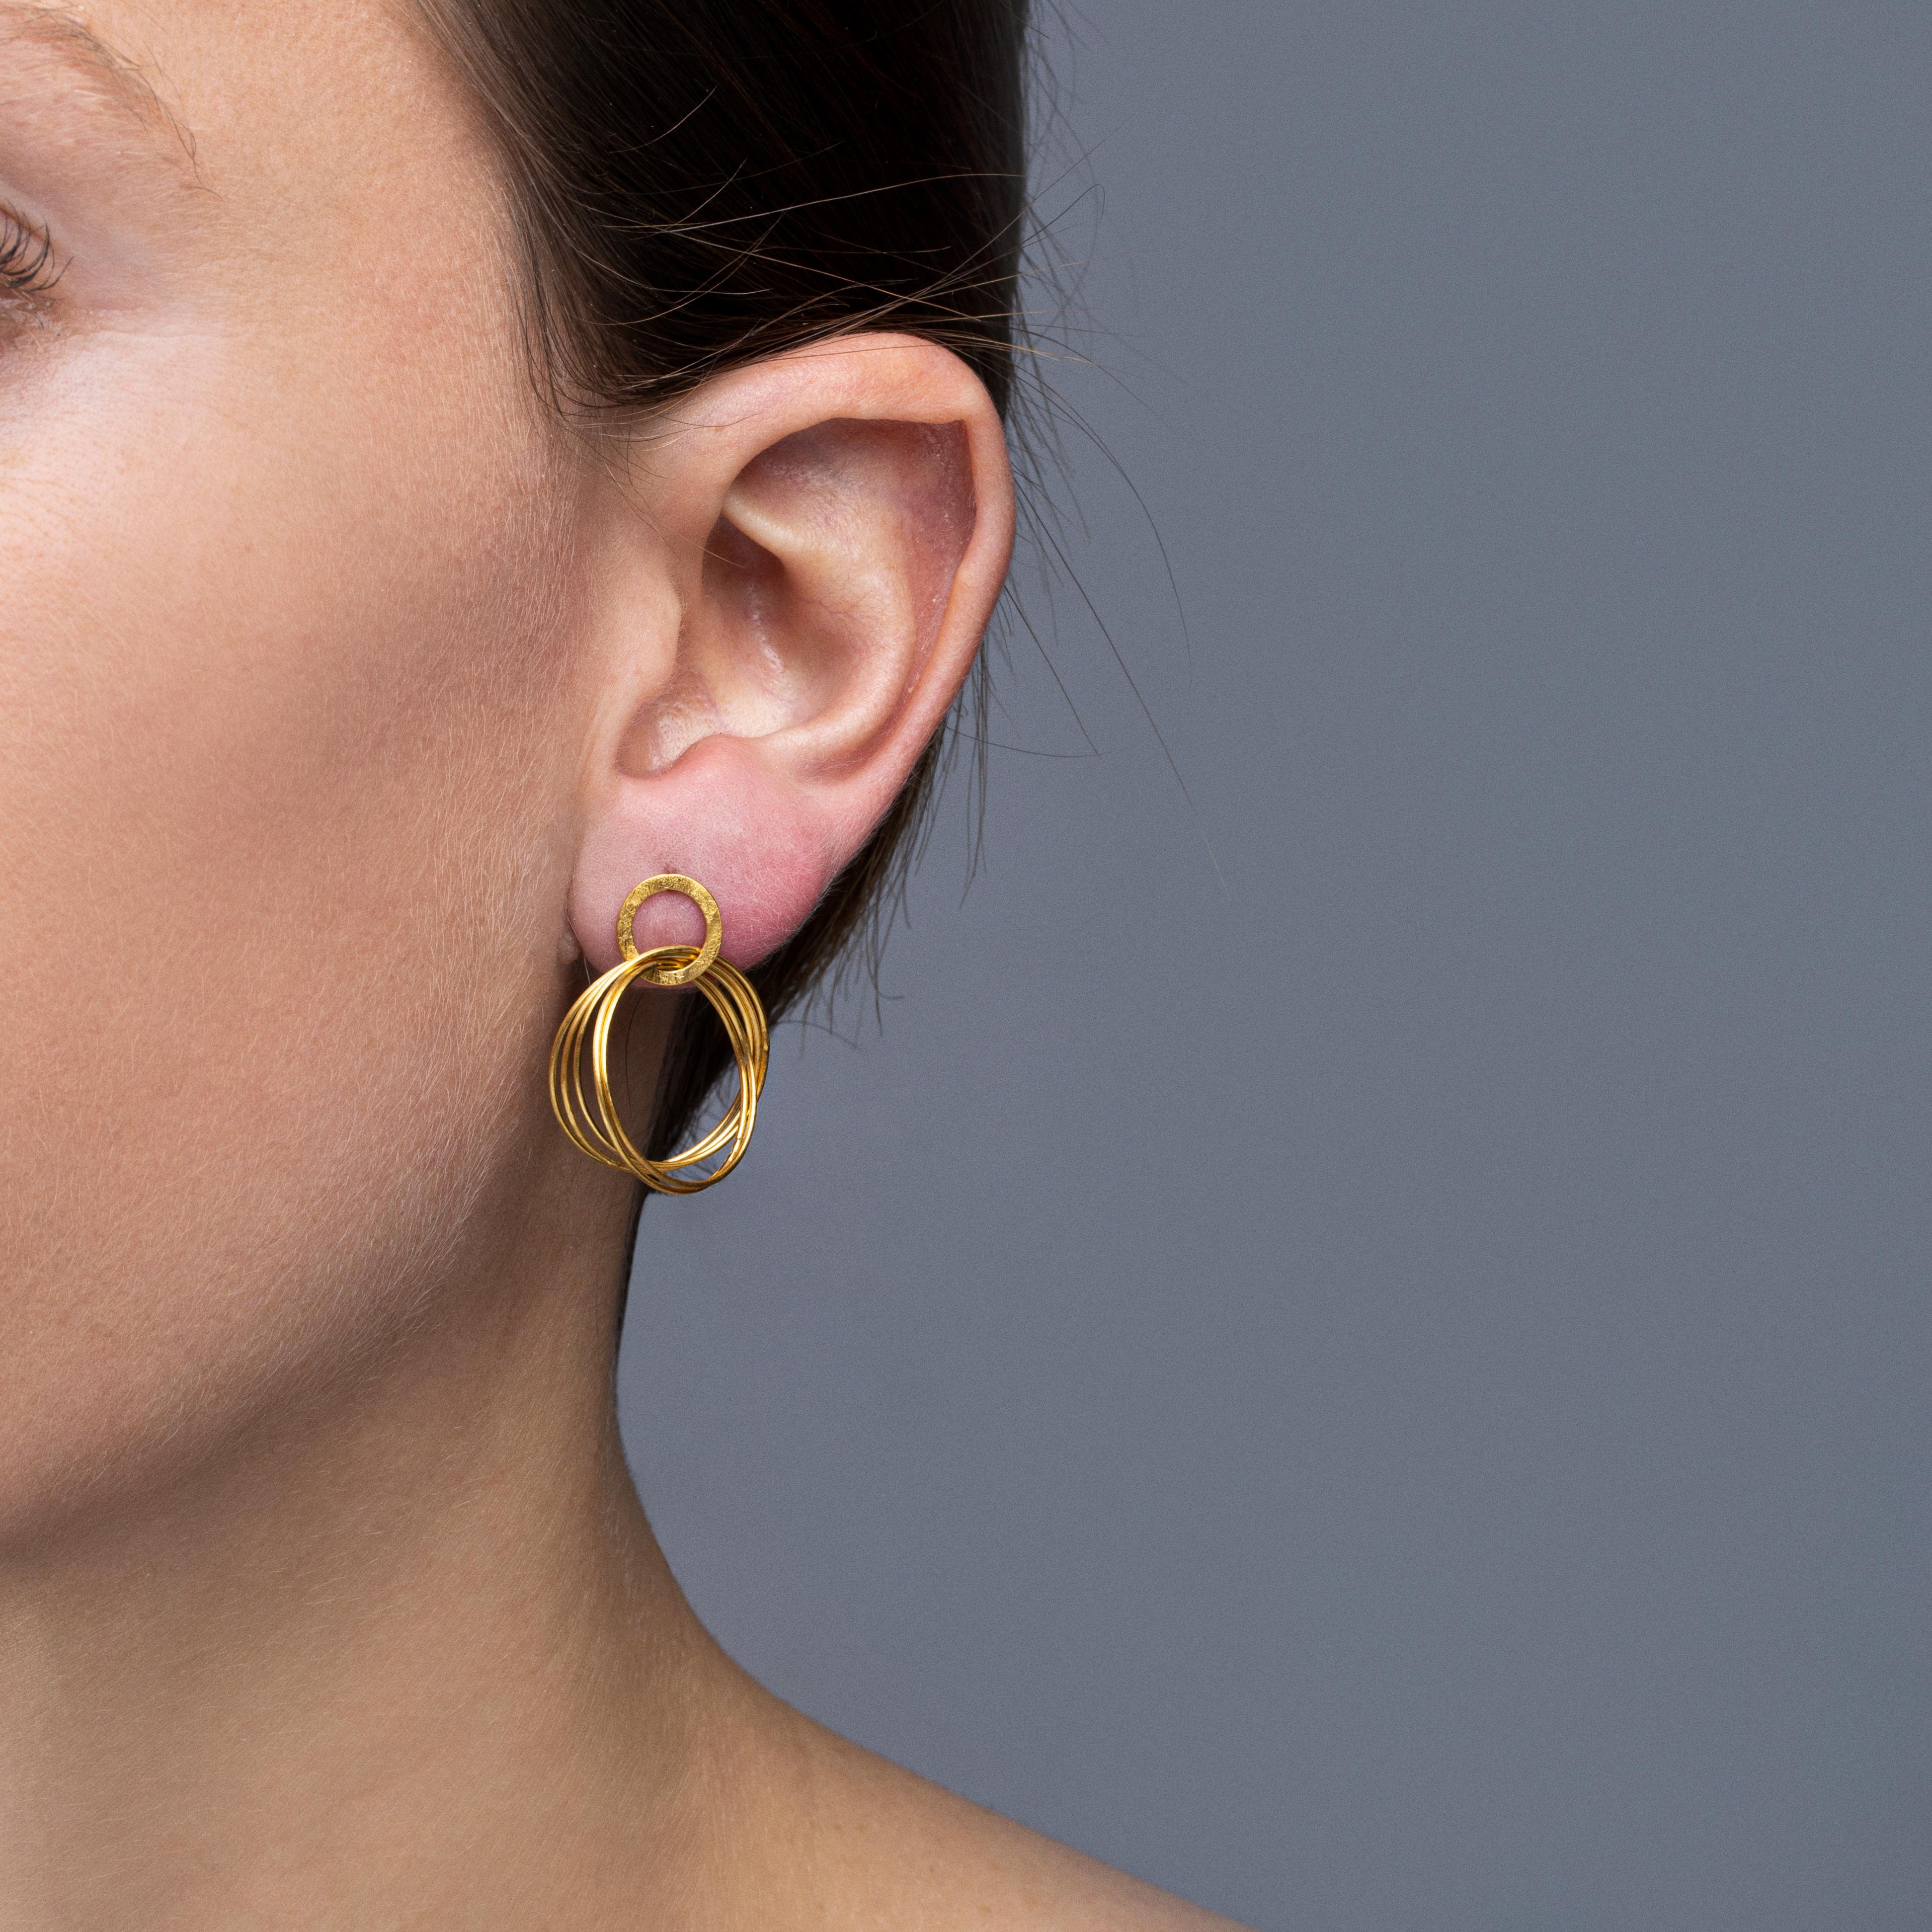 Alex Jona design collection, hand crafted in Italy, 18 karat rough frosted yellow gold multiple hoop pendant earrings.
Dimensions: H 0.75in/19mm, W 0.68in/17mm, D 0.07in/1.8mm.

Alex Jona jewels stand out, not only for their special design and for